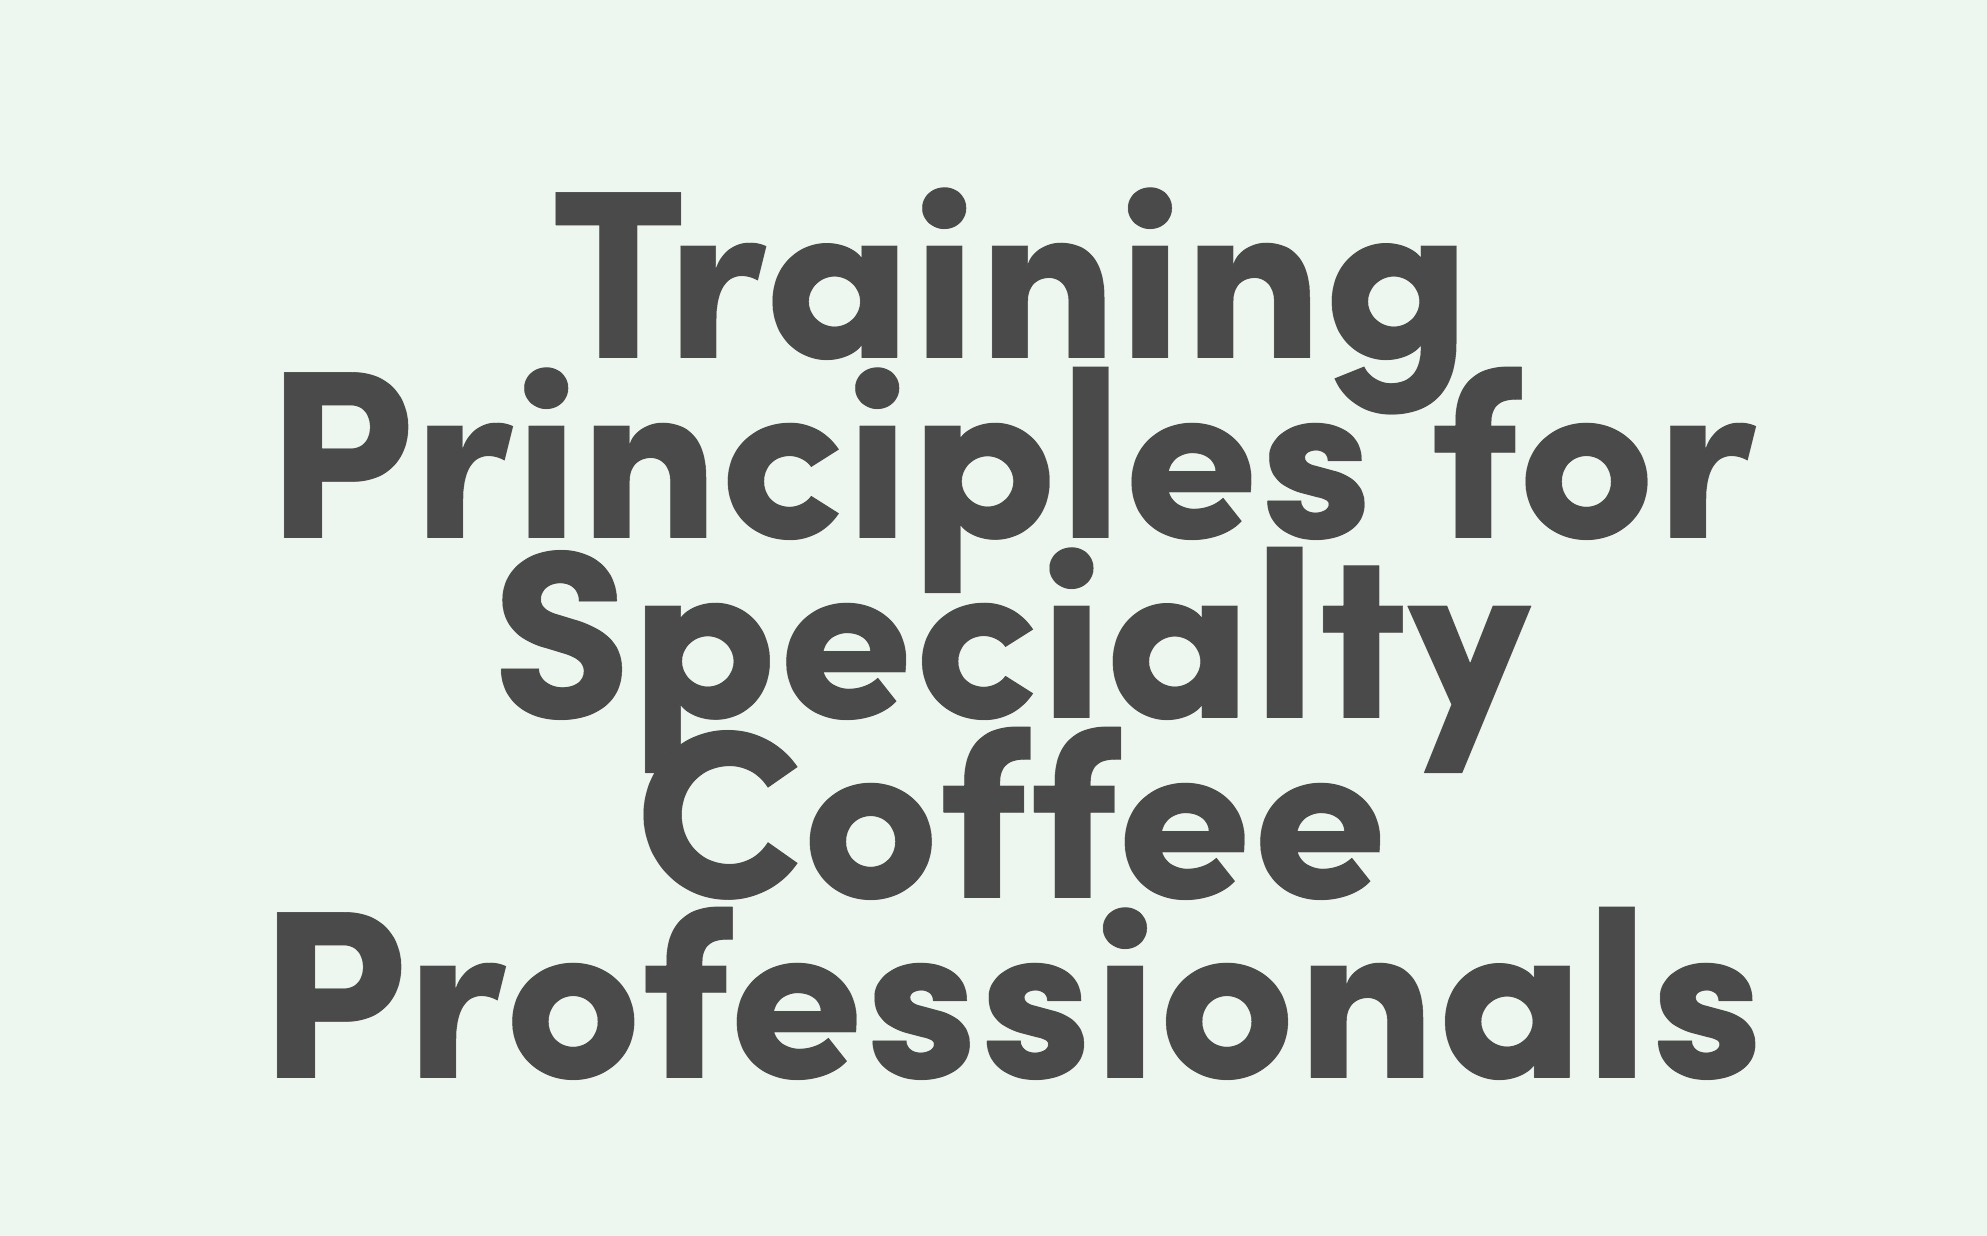 Training Principles for Specialty Coffee Professionals book